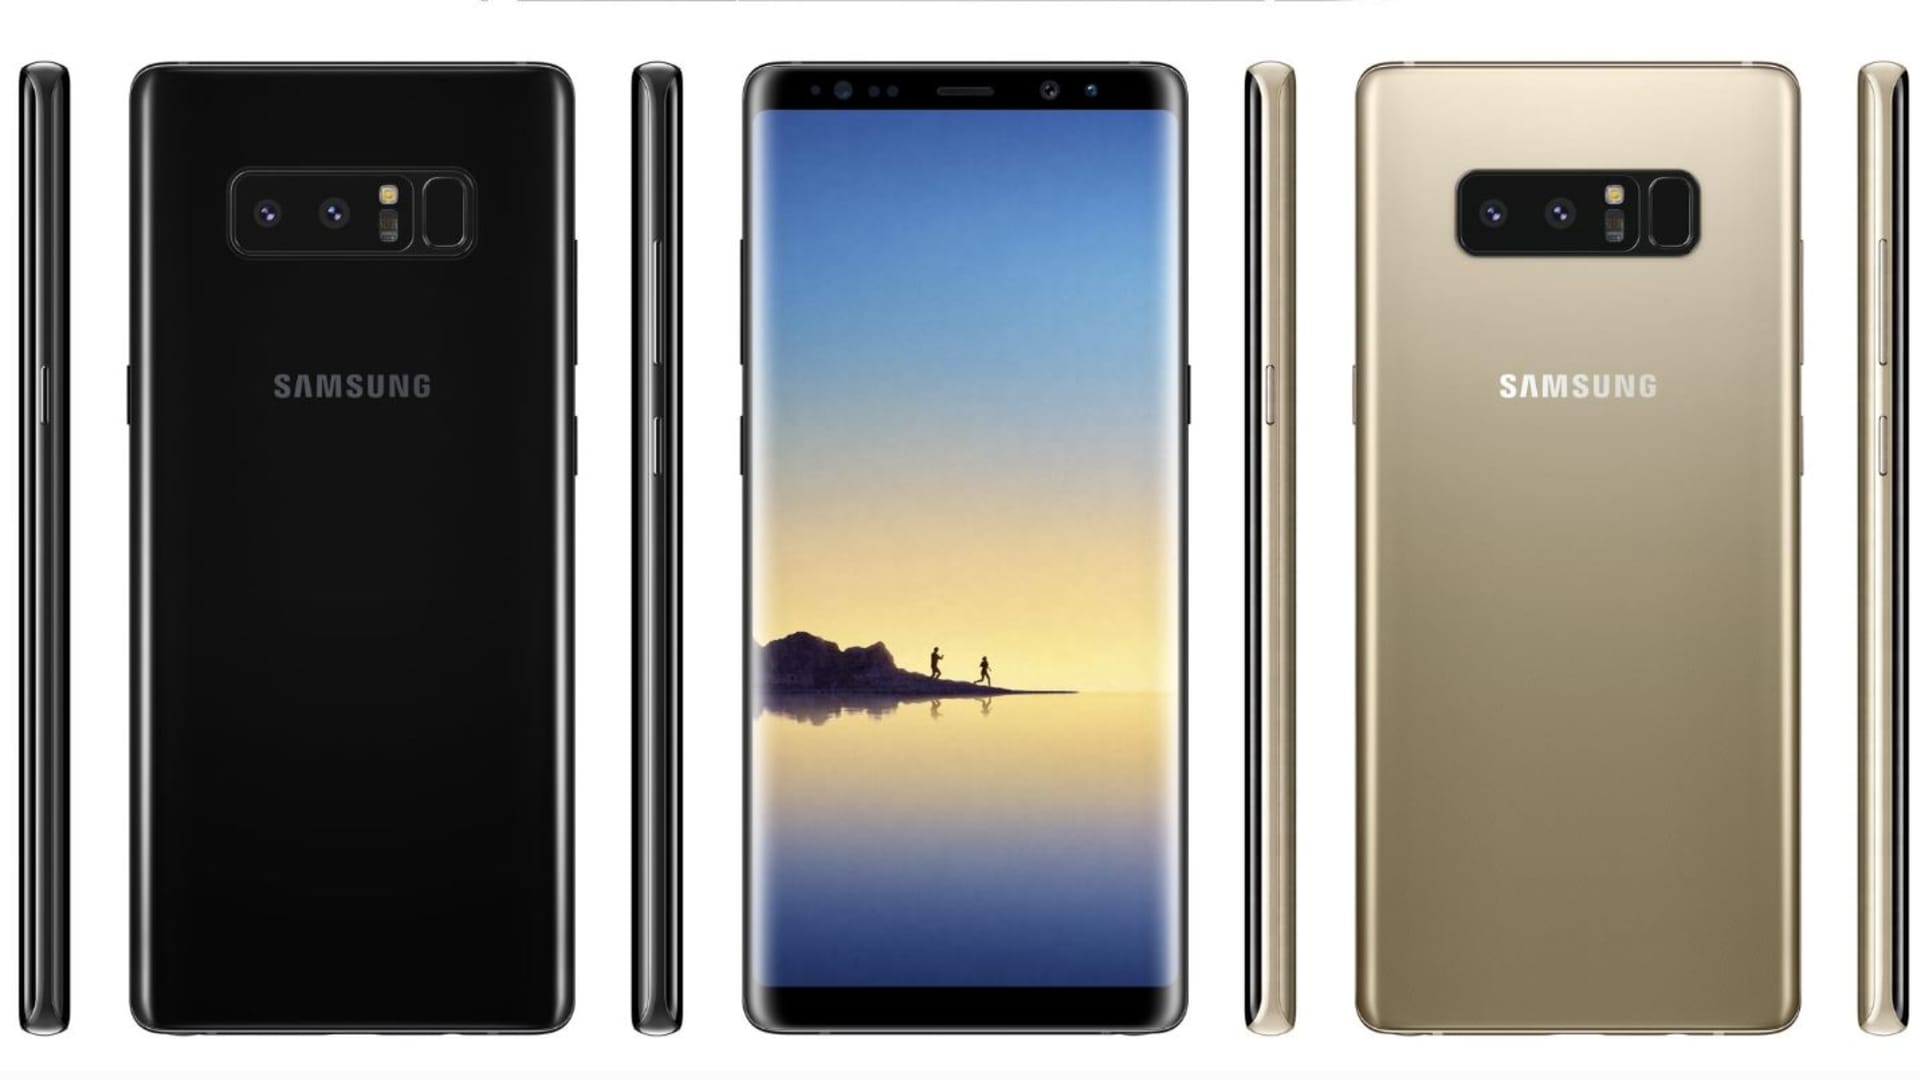 Galaxy Note 8 image appears early